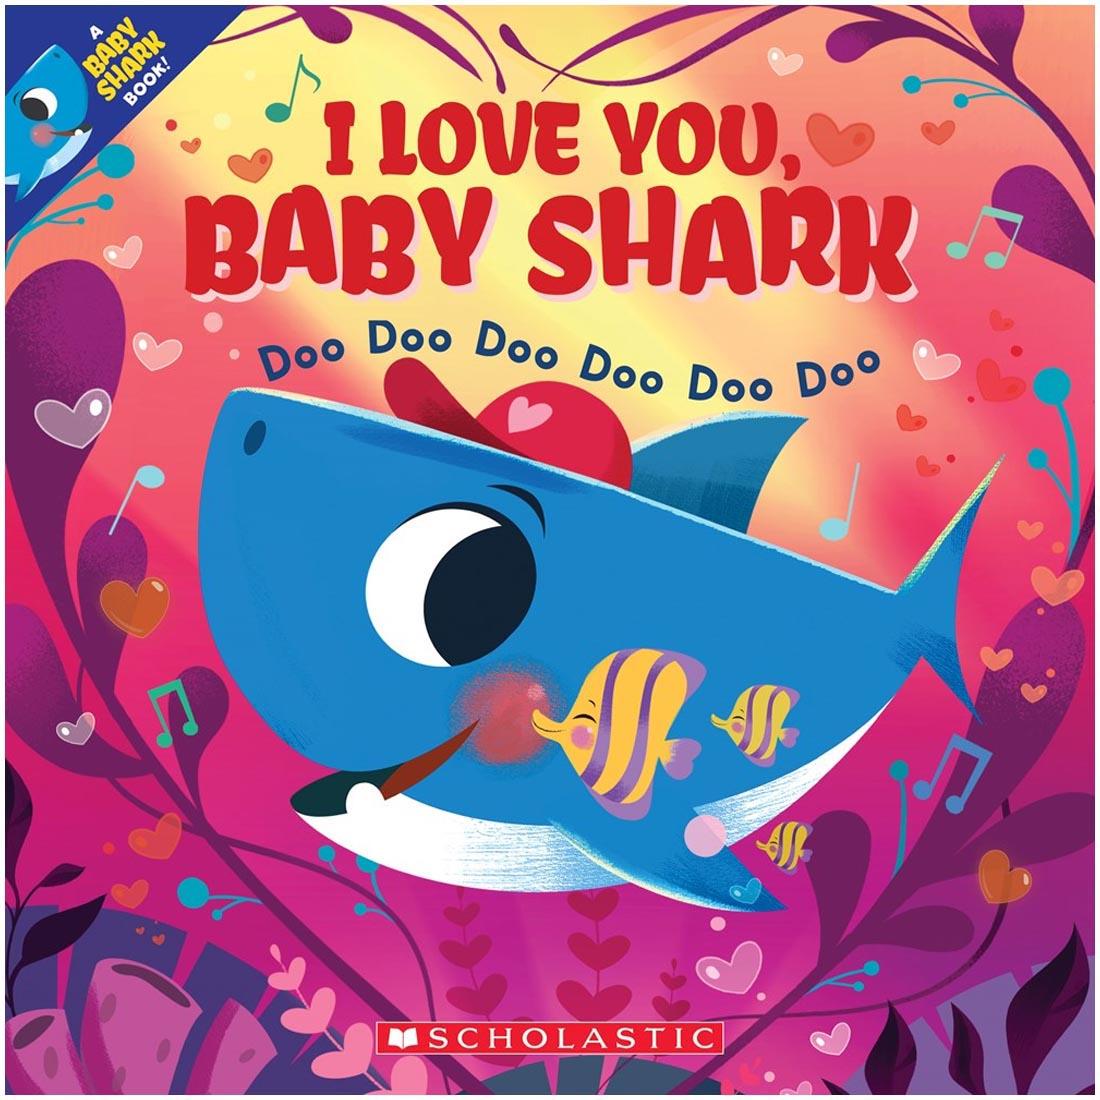 I Love You, Baby Shark book by Scholastic